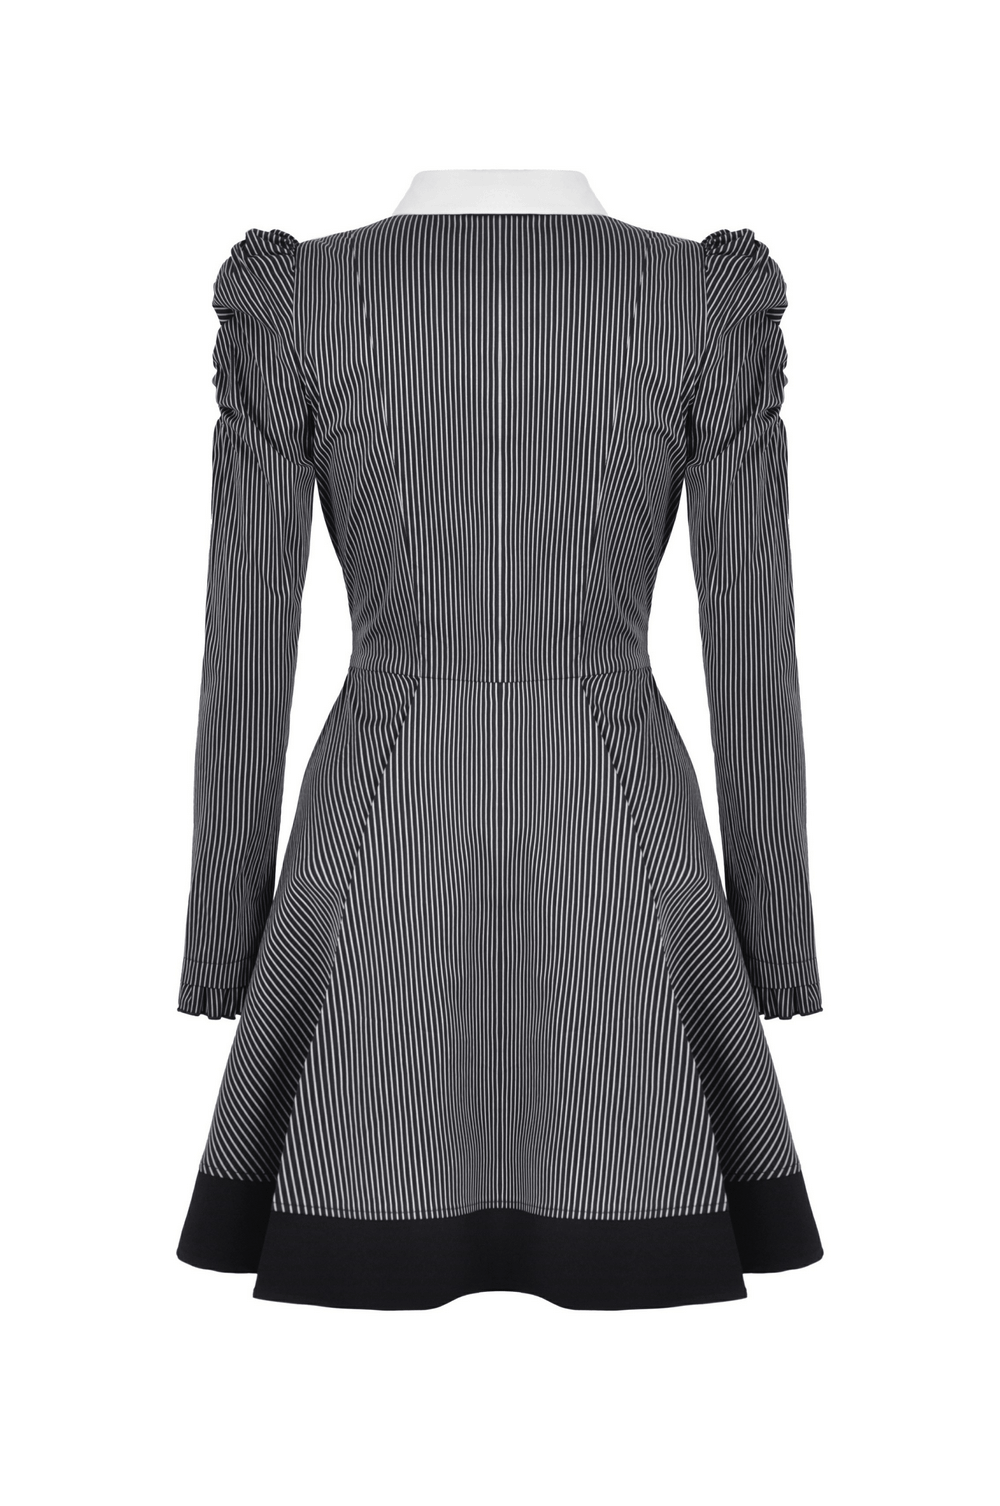 Steampunk Striped Dress with Ruffled Sleeves and Bow